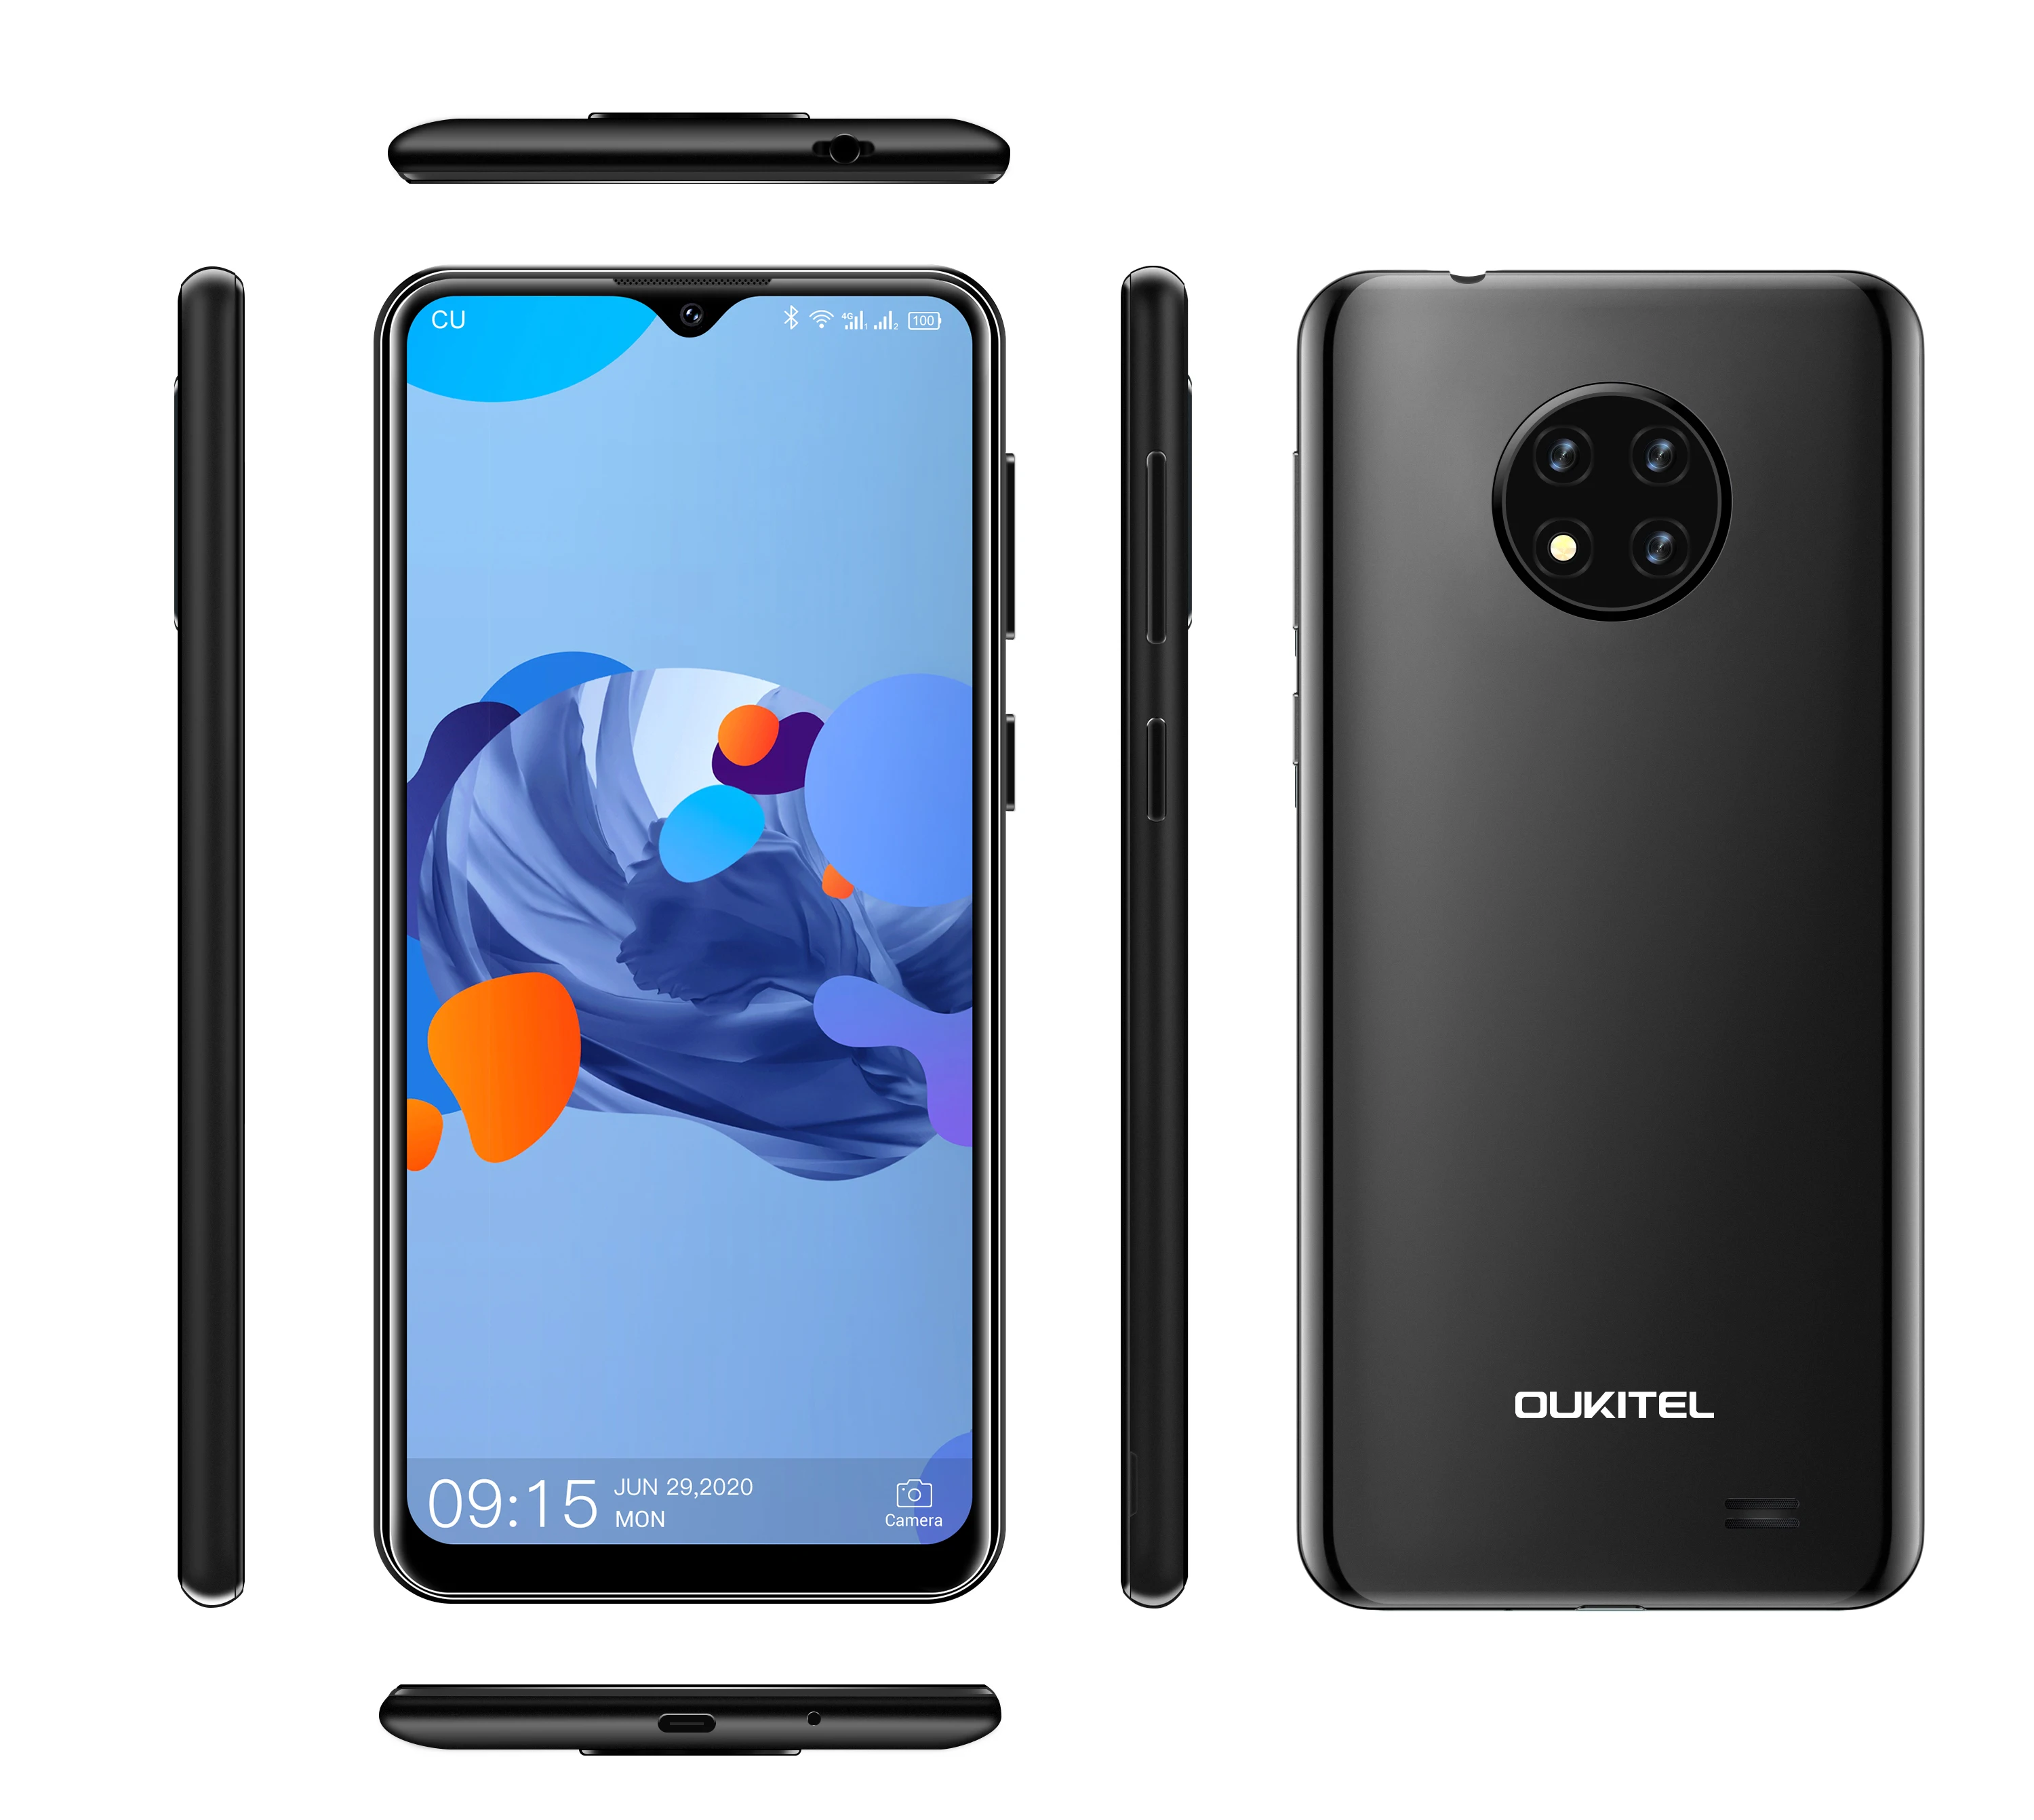 

Global Version OUKITEL C19 6.49 inch 4G LTE Smartphone Android 10.0 Mobile Phone Quad Core 2G RAM 16G ROM 4000mAh3 Rear Cameras